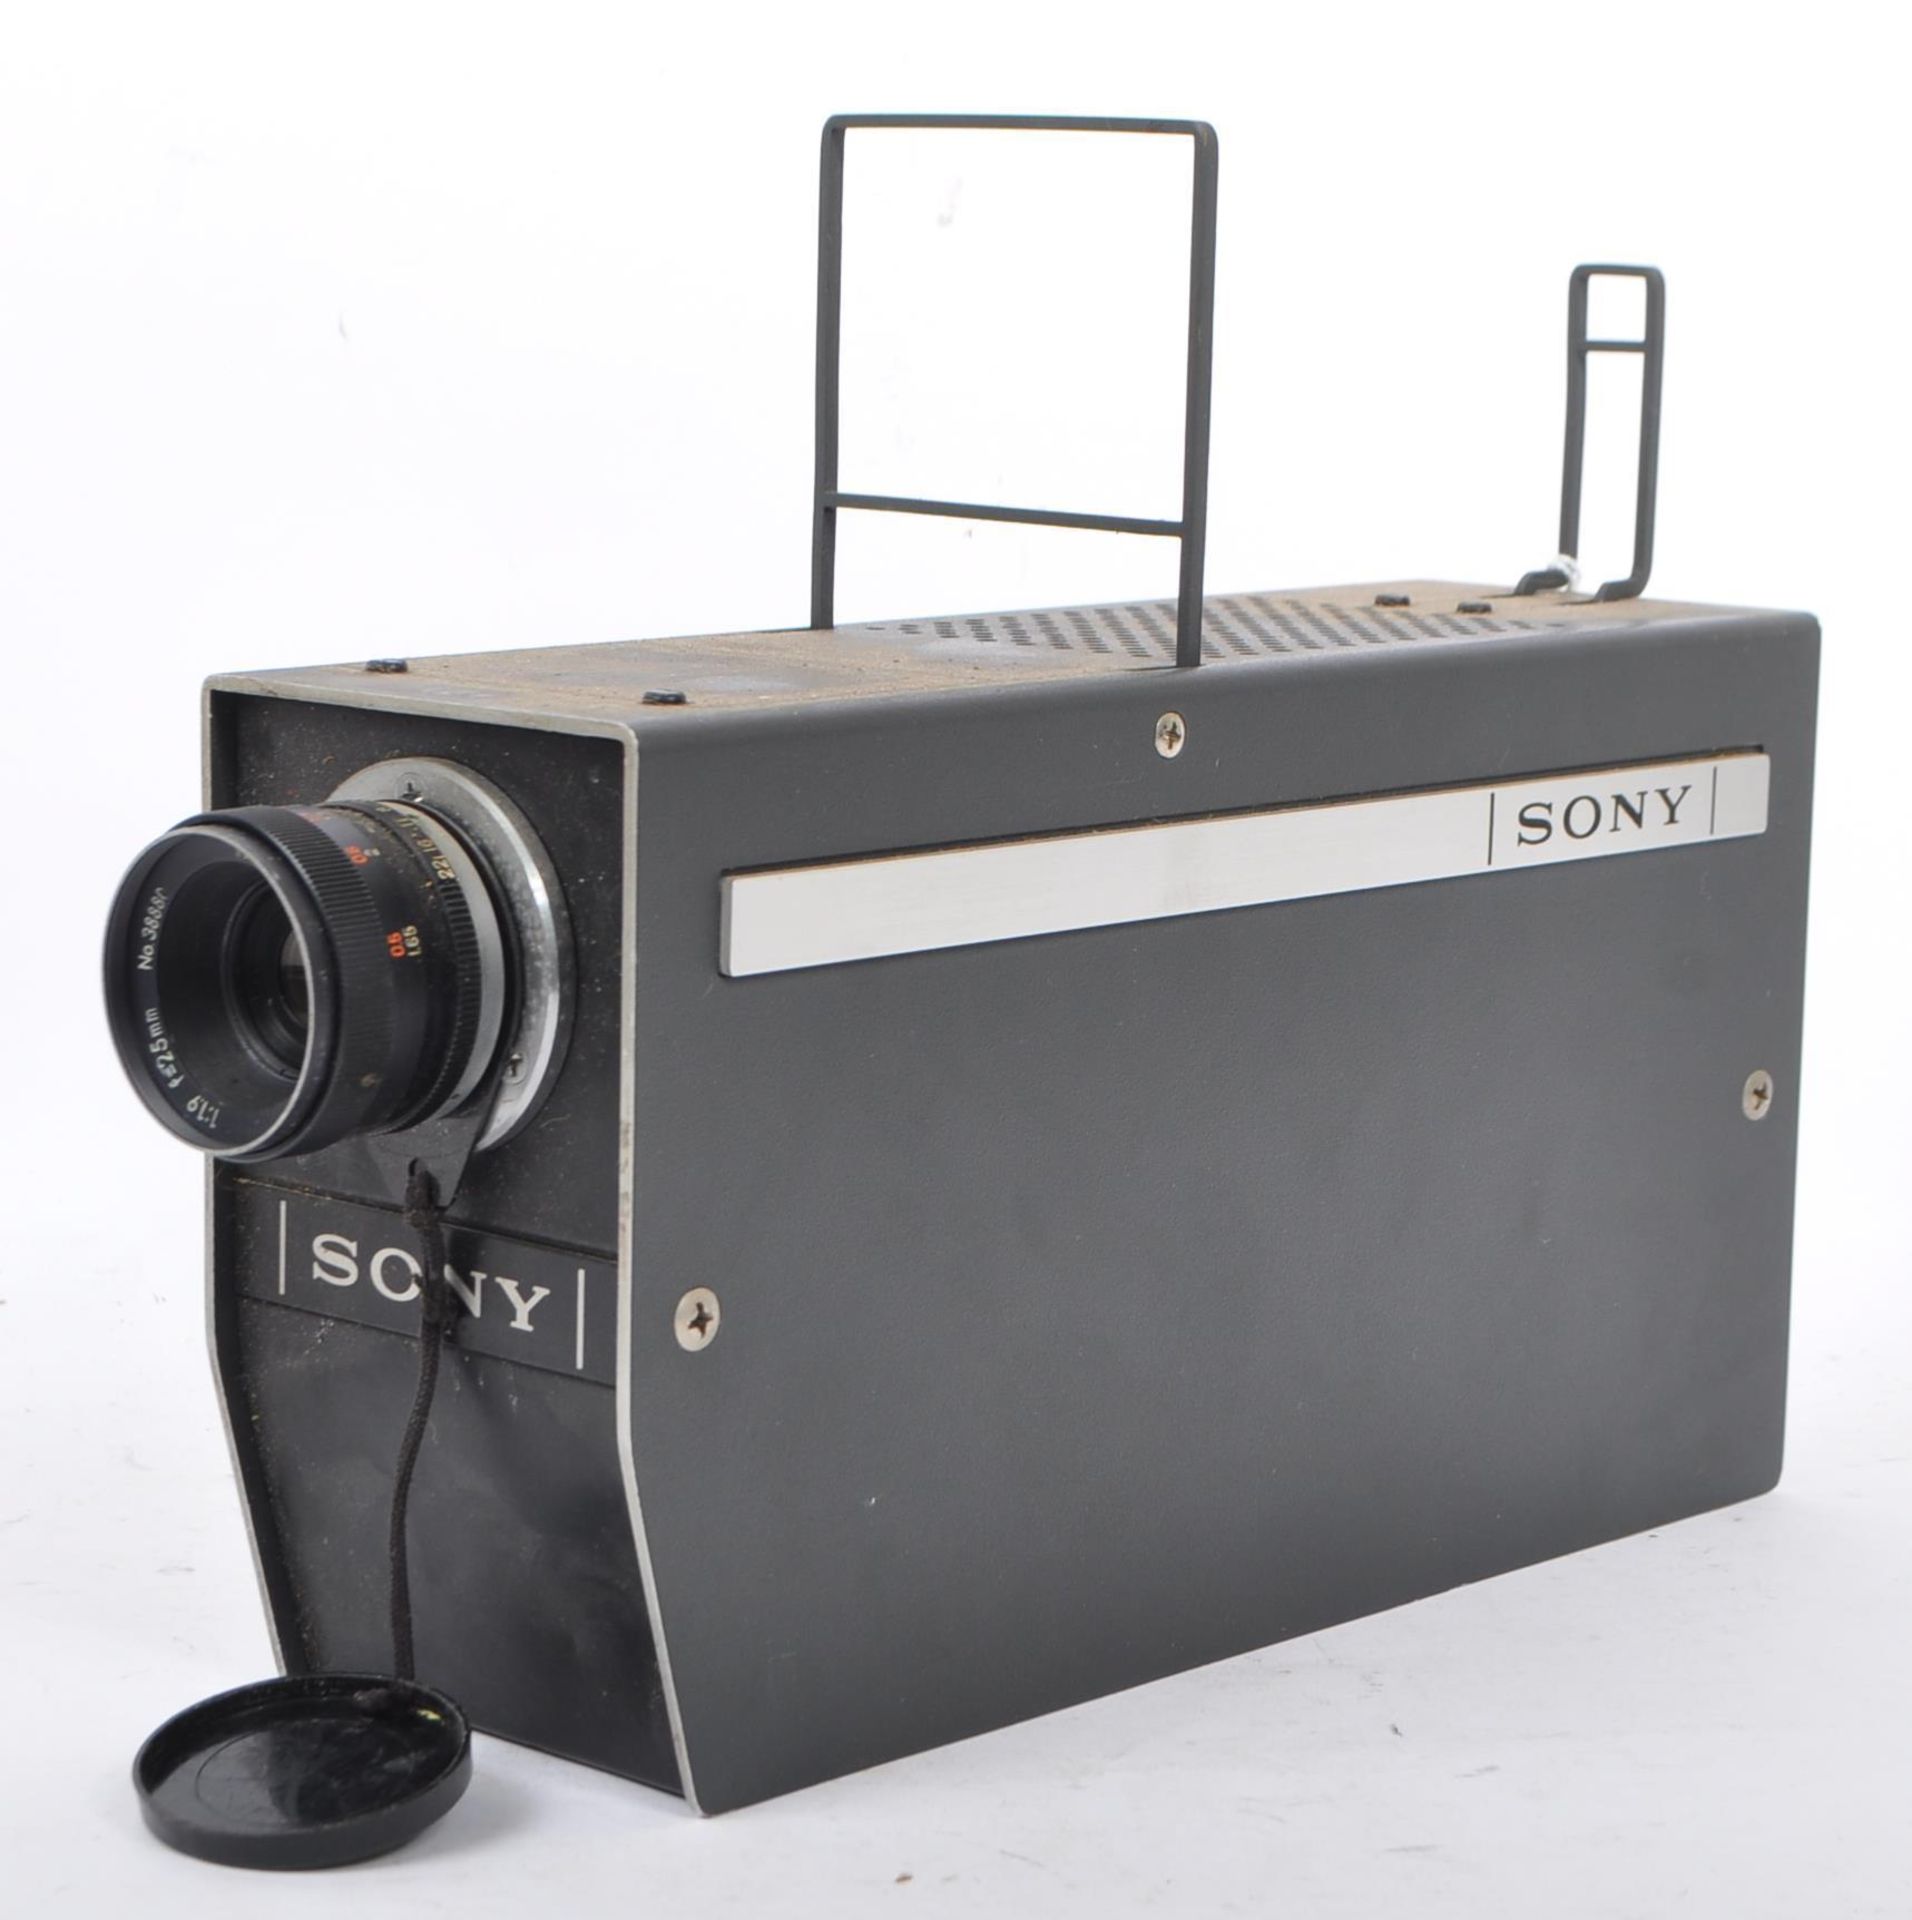 1966 VIDEO CAMERA WITH TAMRON TELEVISION LENS BY SONY CORP - Image 2 of 5